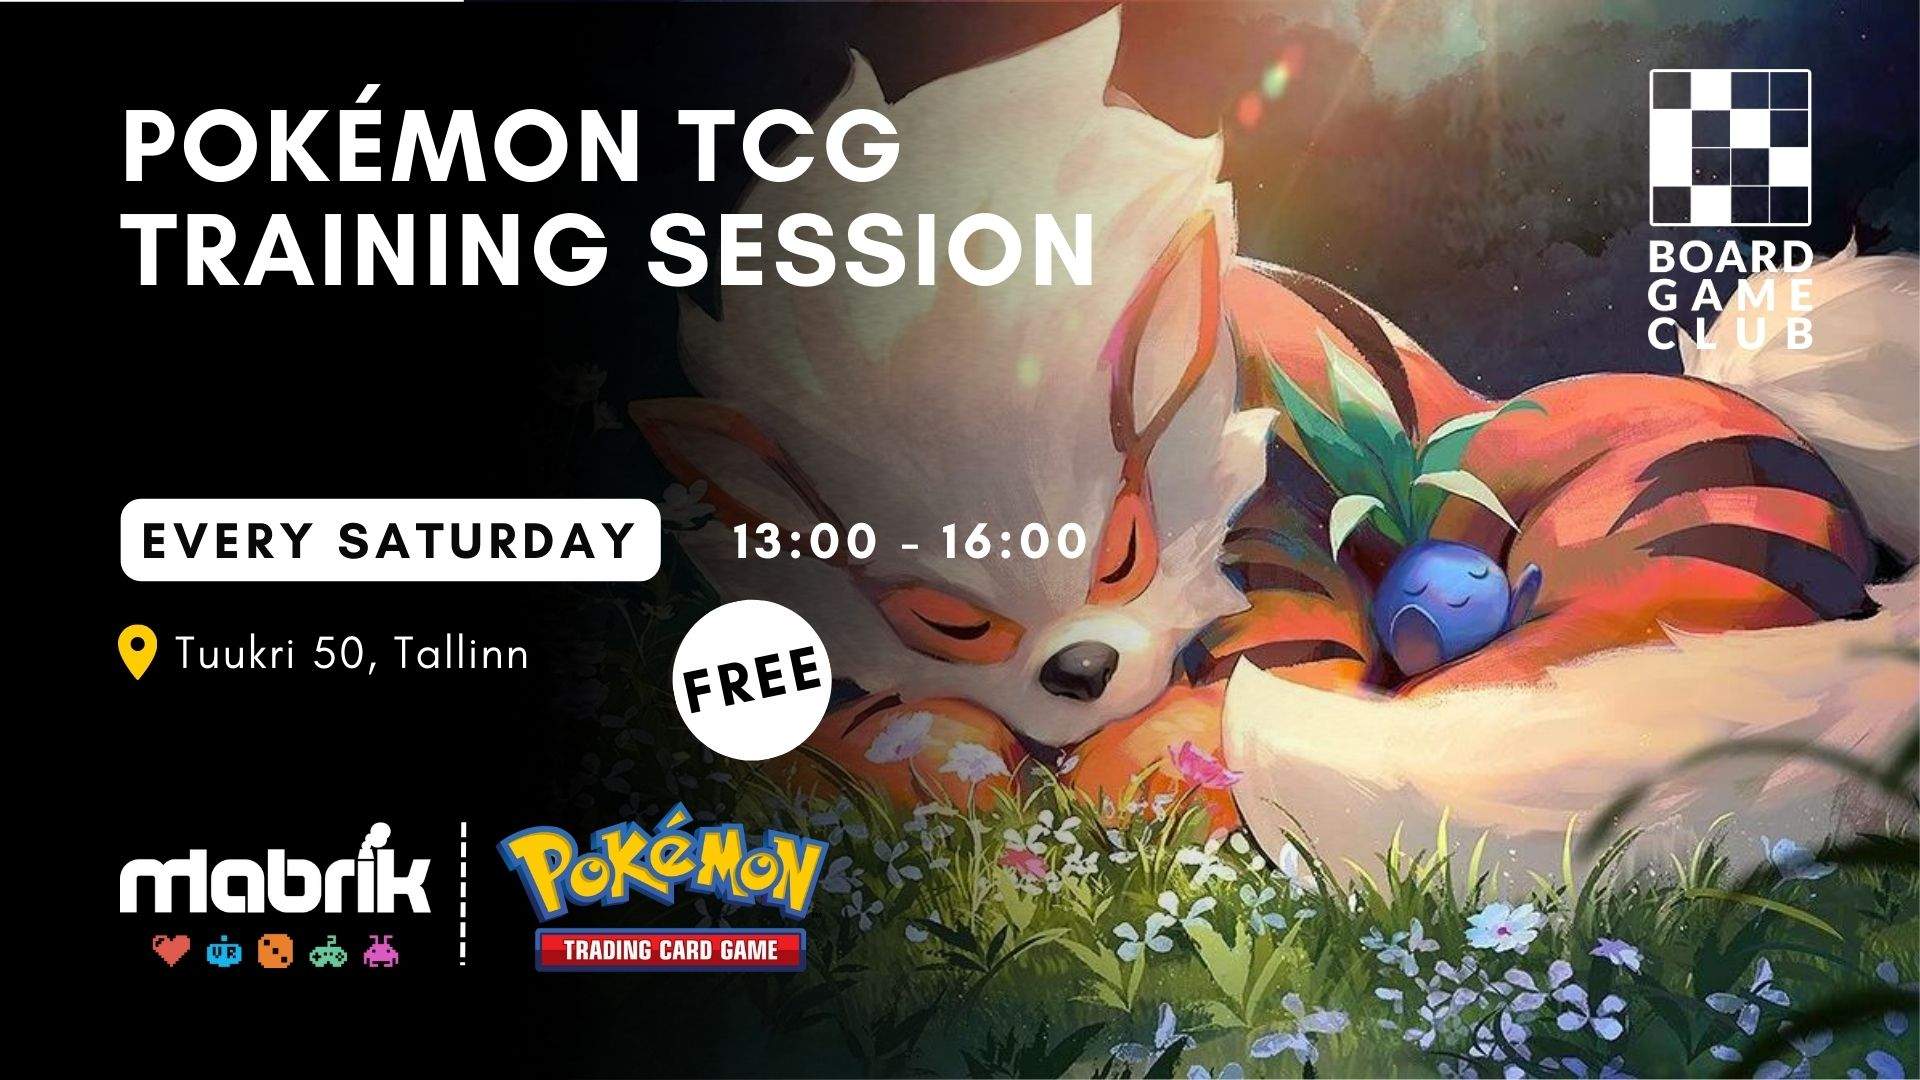 Events - Every Saturday - Pokemon Training Sessions